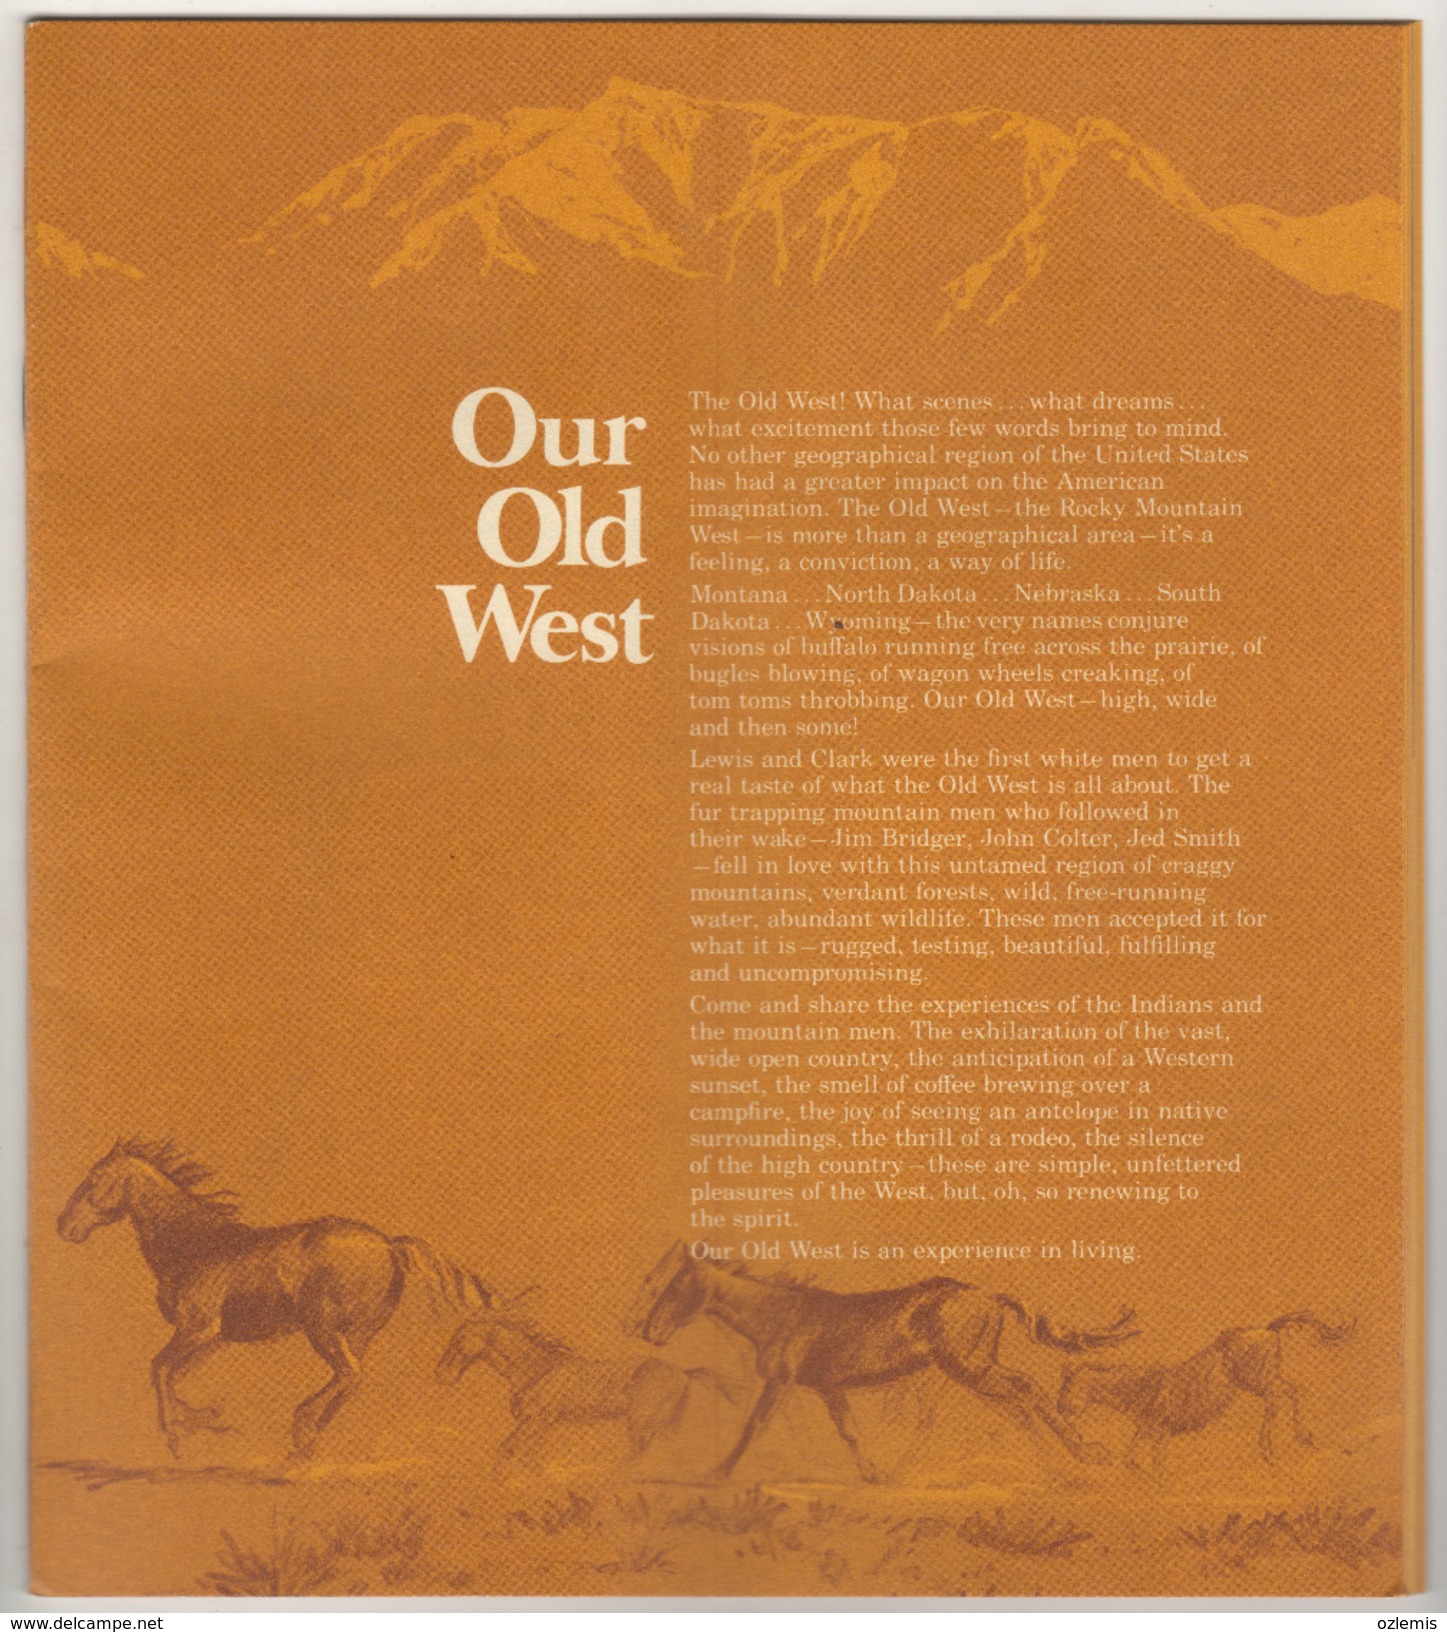 OLD WEST TOWN&VCOUNTRY EXCITEMENT 1976  BROCHURES  UNITED AIRLINES AND FRONTIER AIRLINES - Publicidad